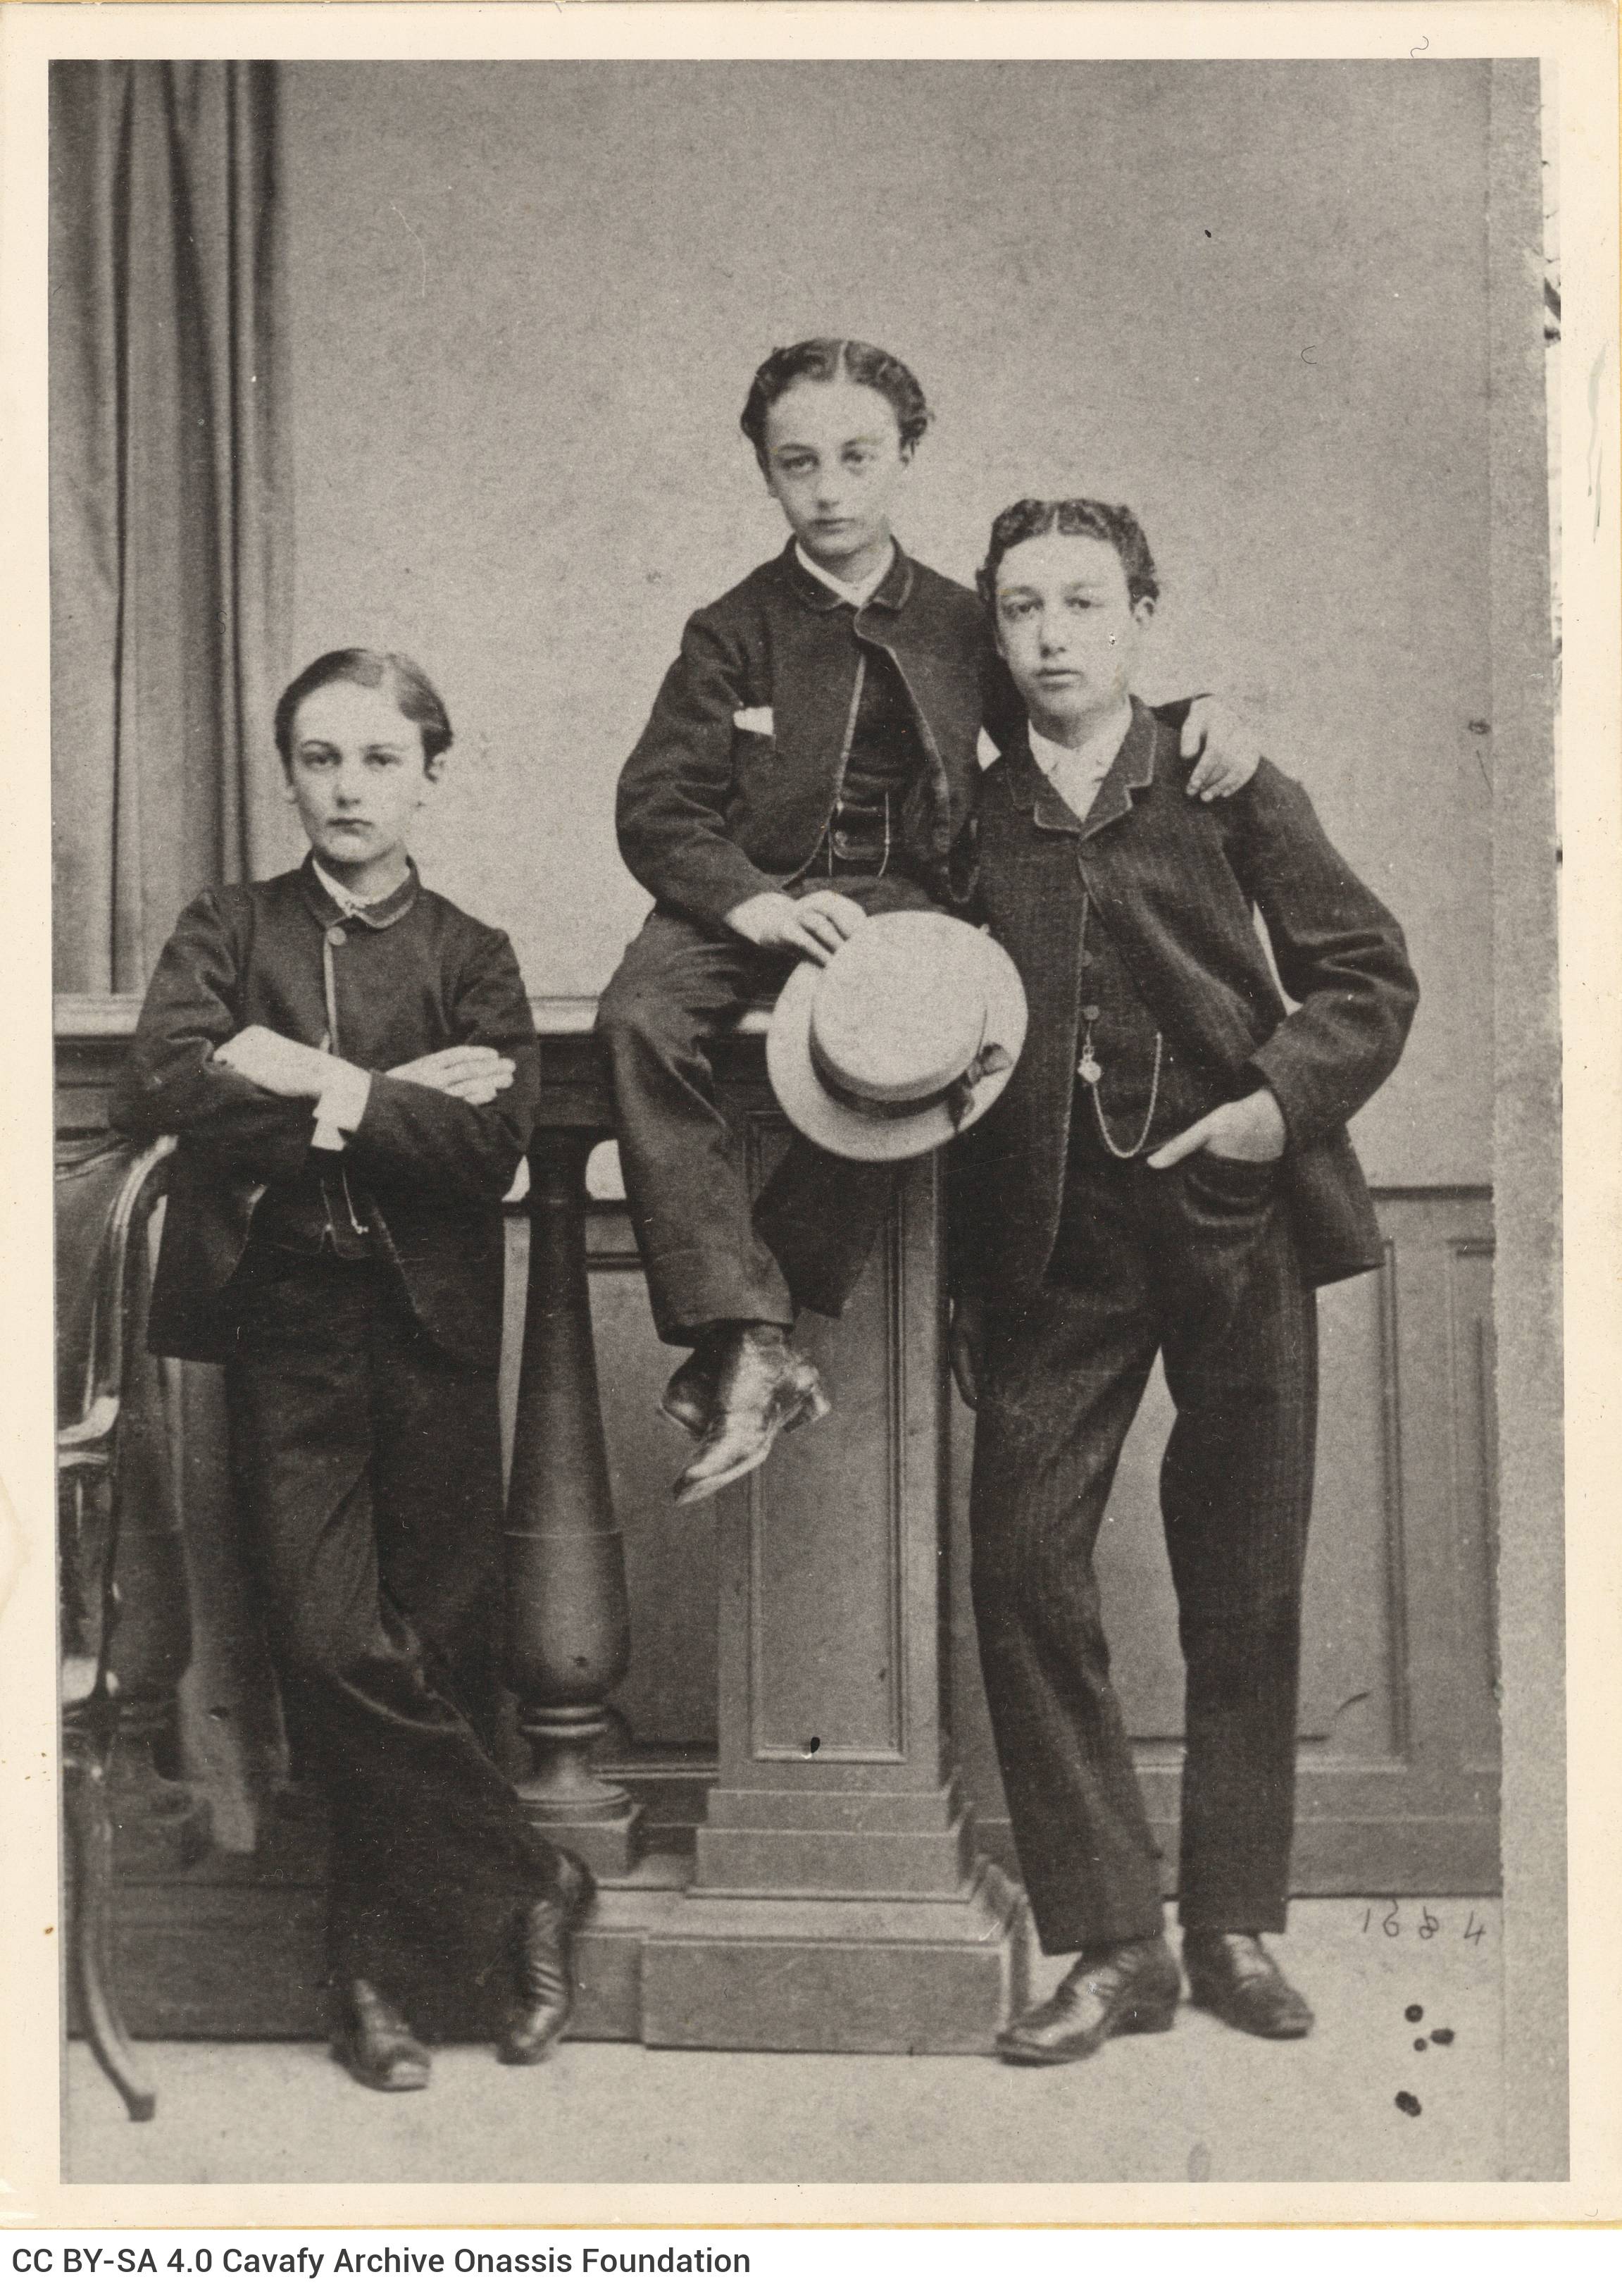 Photograph of three boys in costumes. The boy in the middle stands on a piece of furniture and holds a hat in his right hand.